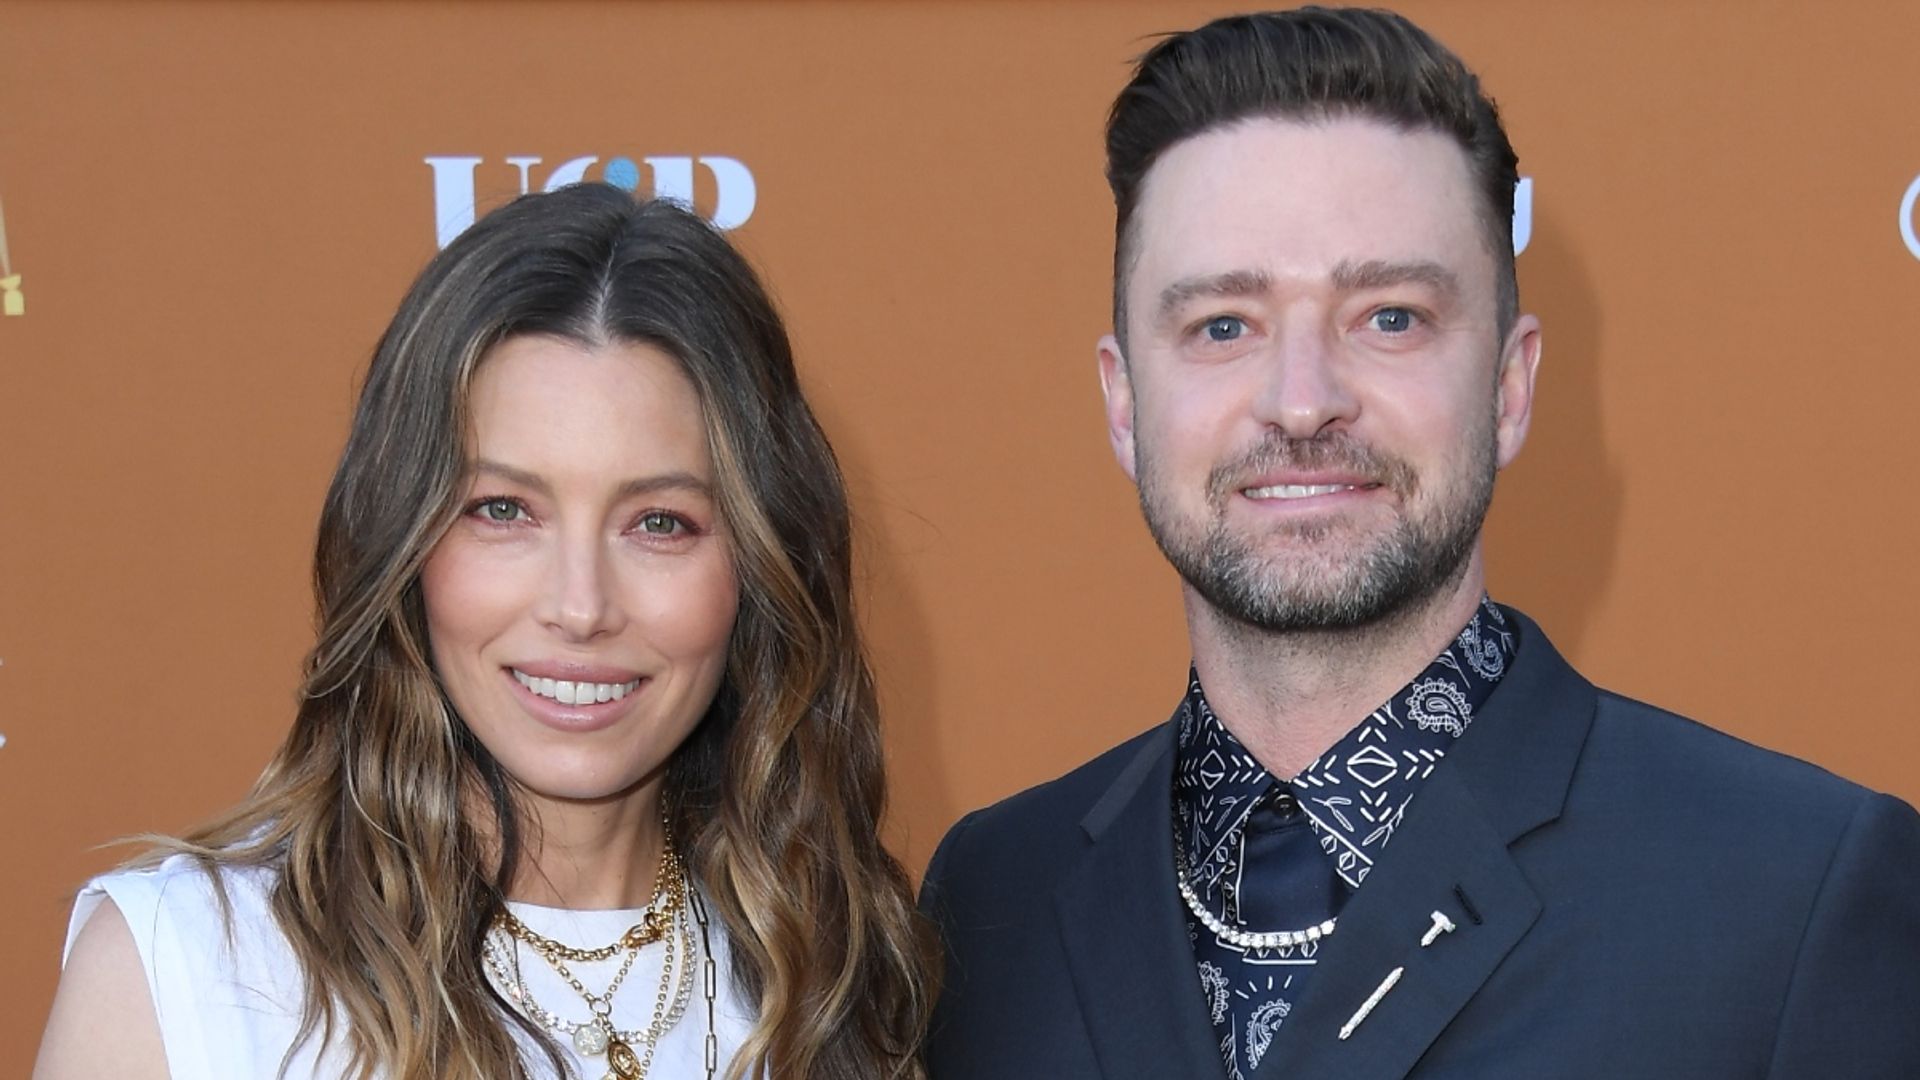 Justin Timberlake and Jessica Biel Just Shared Rare Pics of Their Sons,  Silas and Phineas